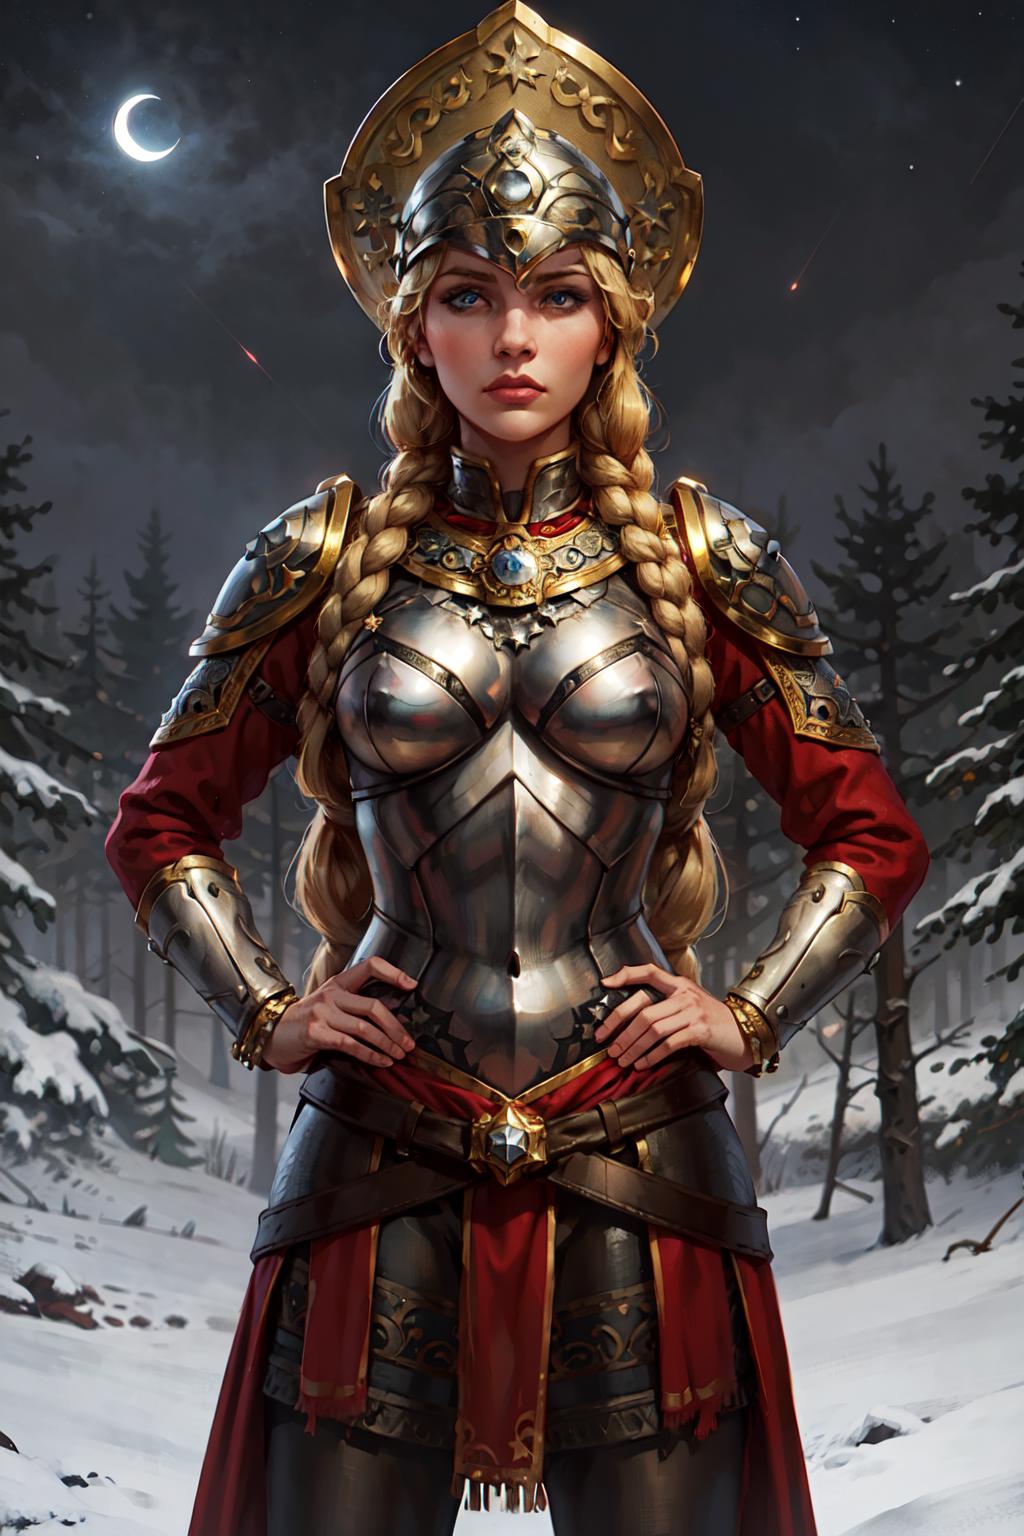 A warrior princess in a fantasy art piece, wearing a golden armor and holding a sword.